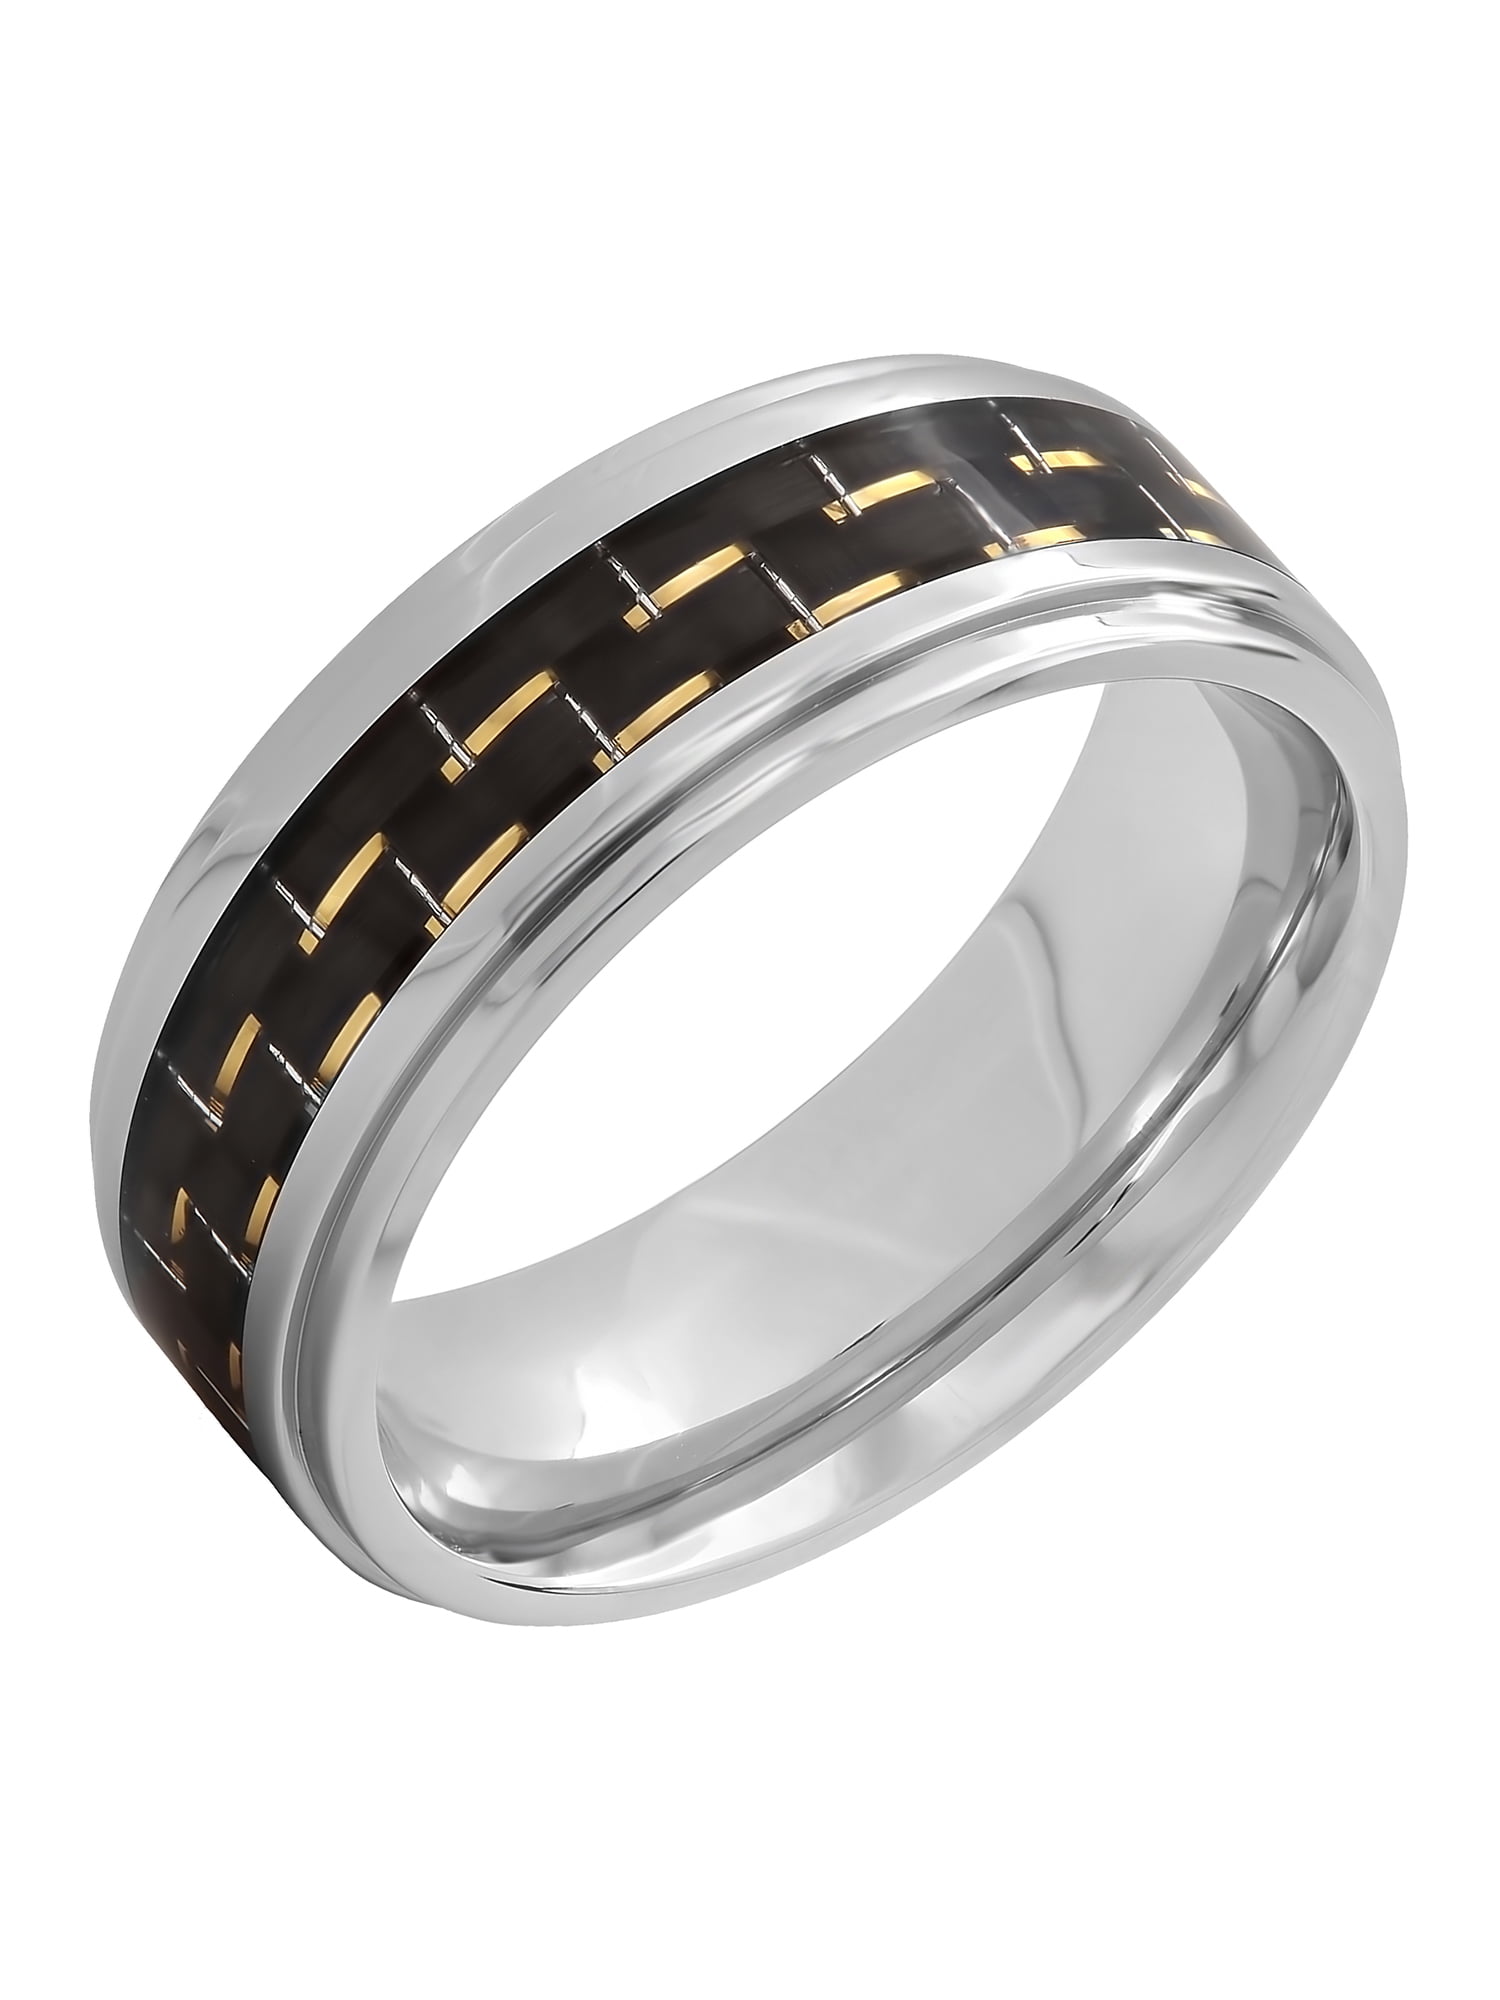 9mm Men's Double Carbon Fiber Inlay Wedding Engagement Band Stainless Steel Ring 